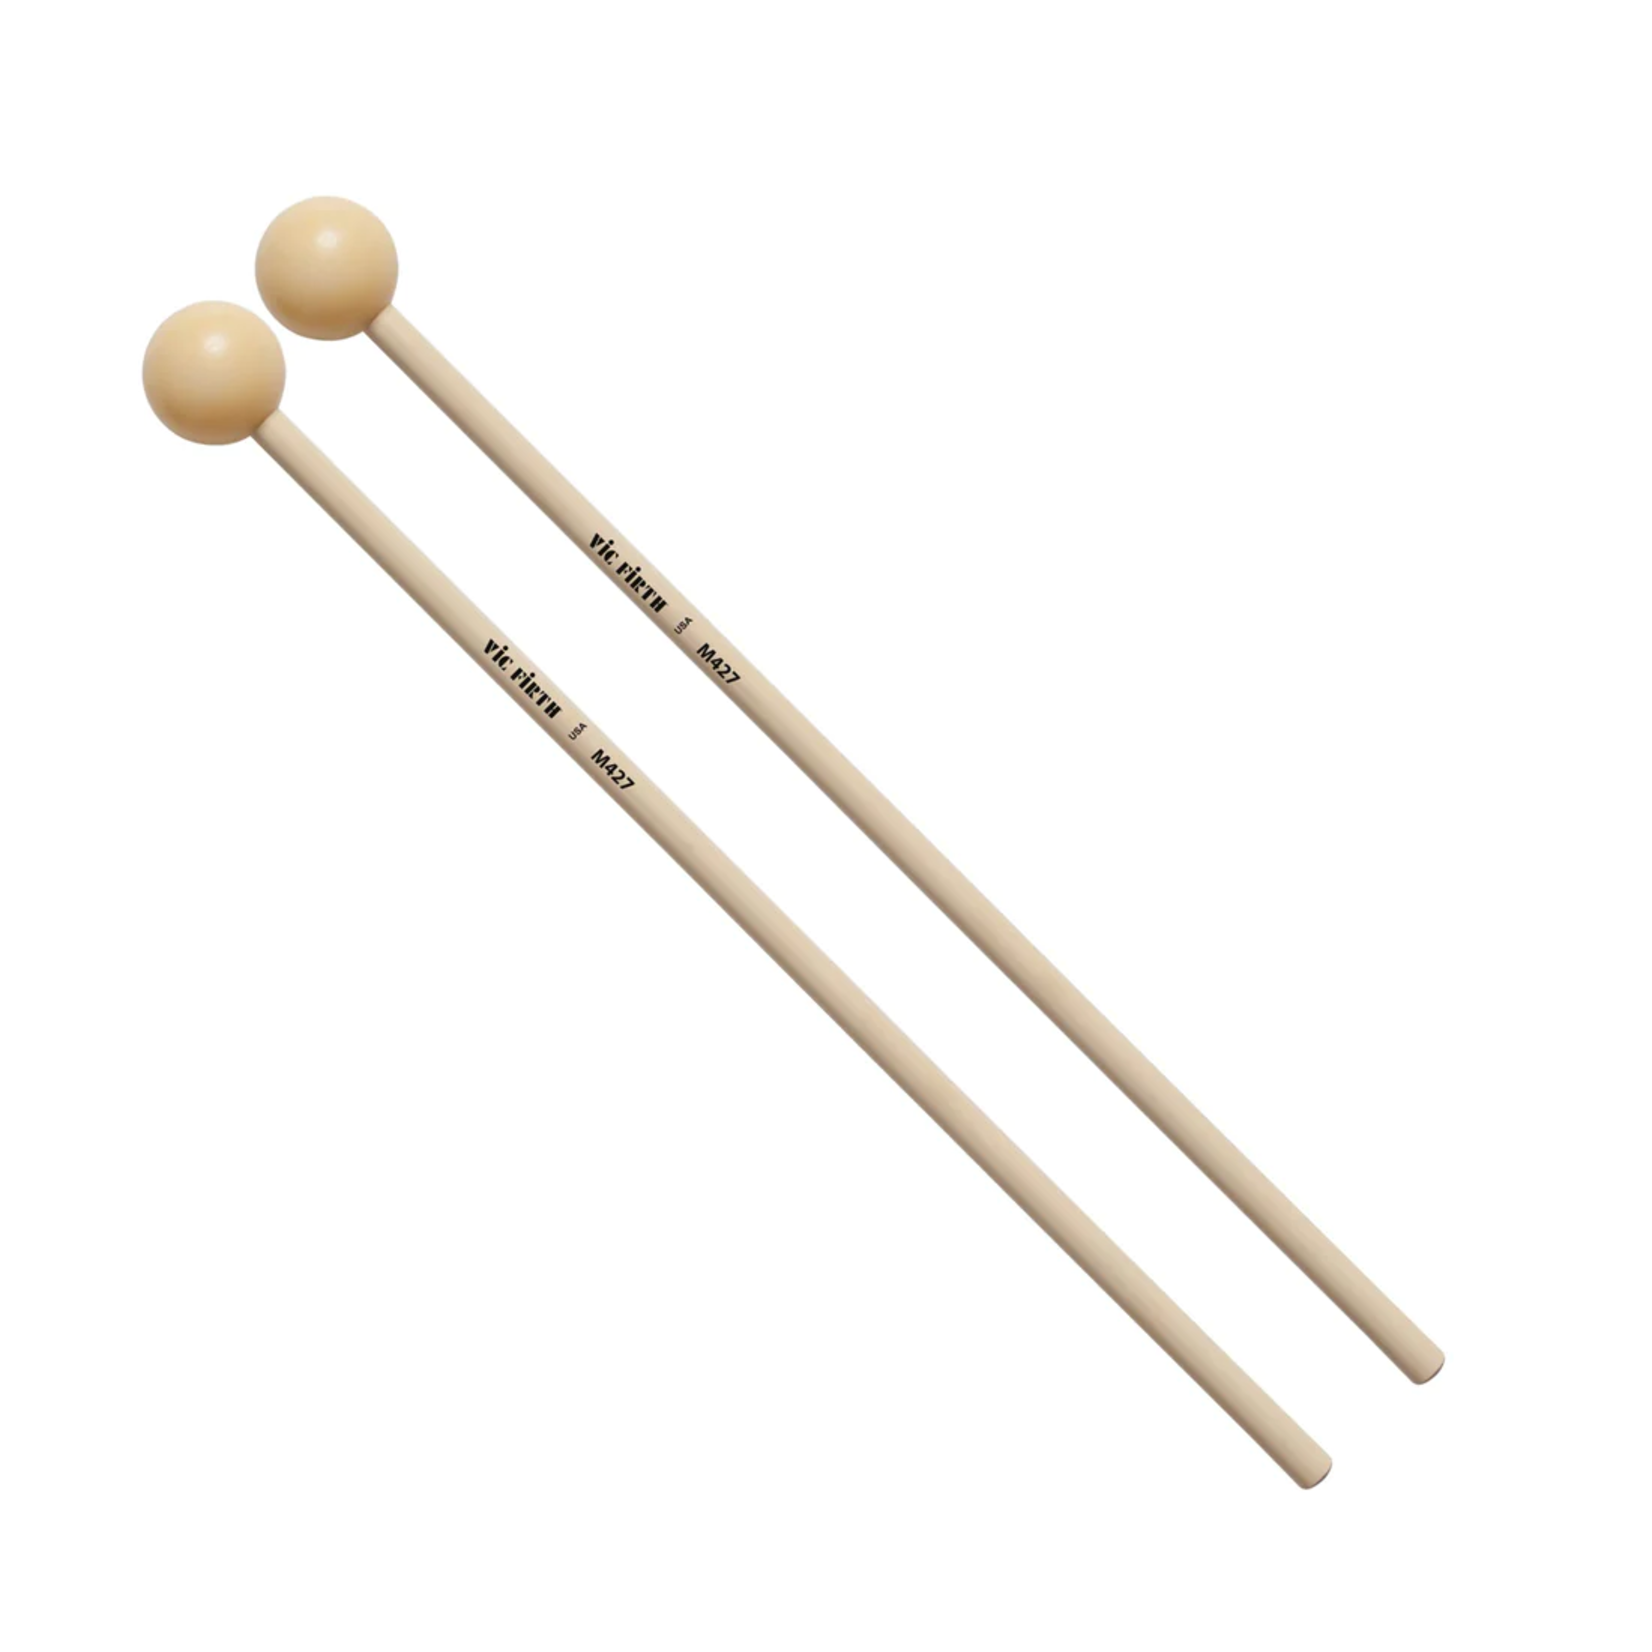 Vic Firth Vic Firth Articulate Series Keyboard Mallet - 1 1/4" Urethane, Round Tip M427